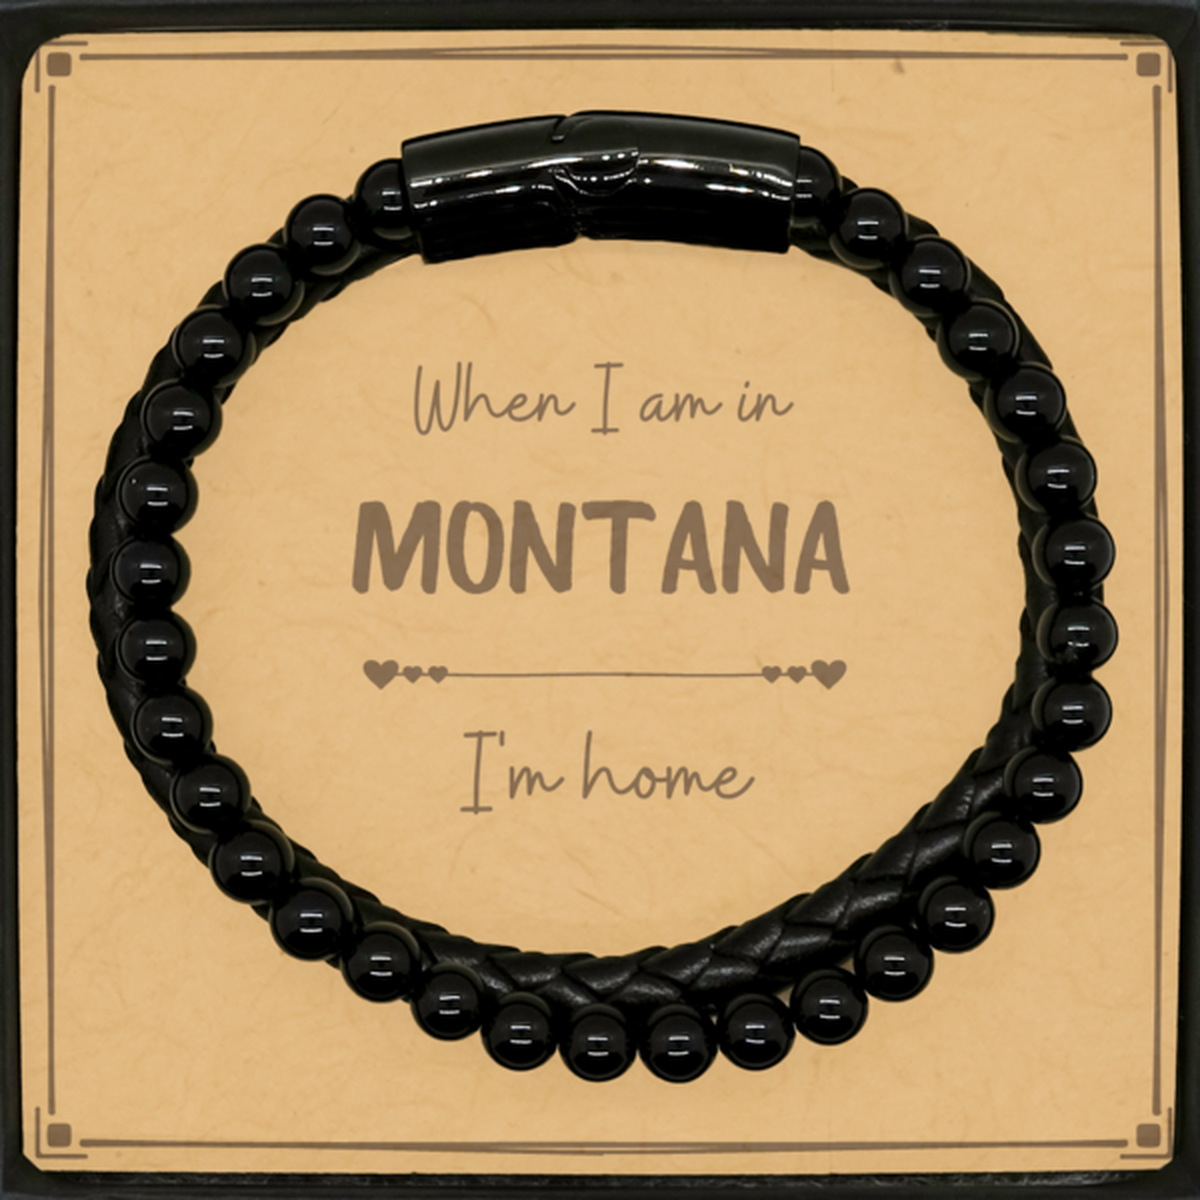 When I am in Montana I'm home Stone Leather Bracelets, Message Card Gifts For Montana, State Montana Birthday Gifts for Friends Coworker